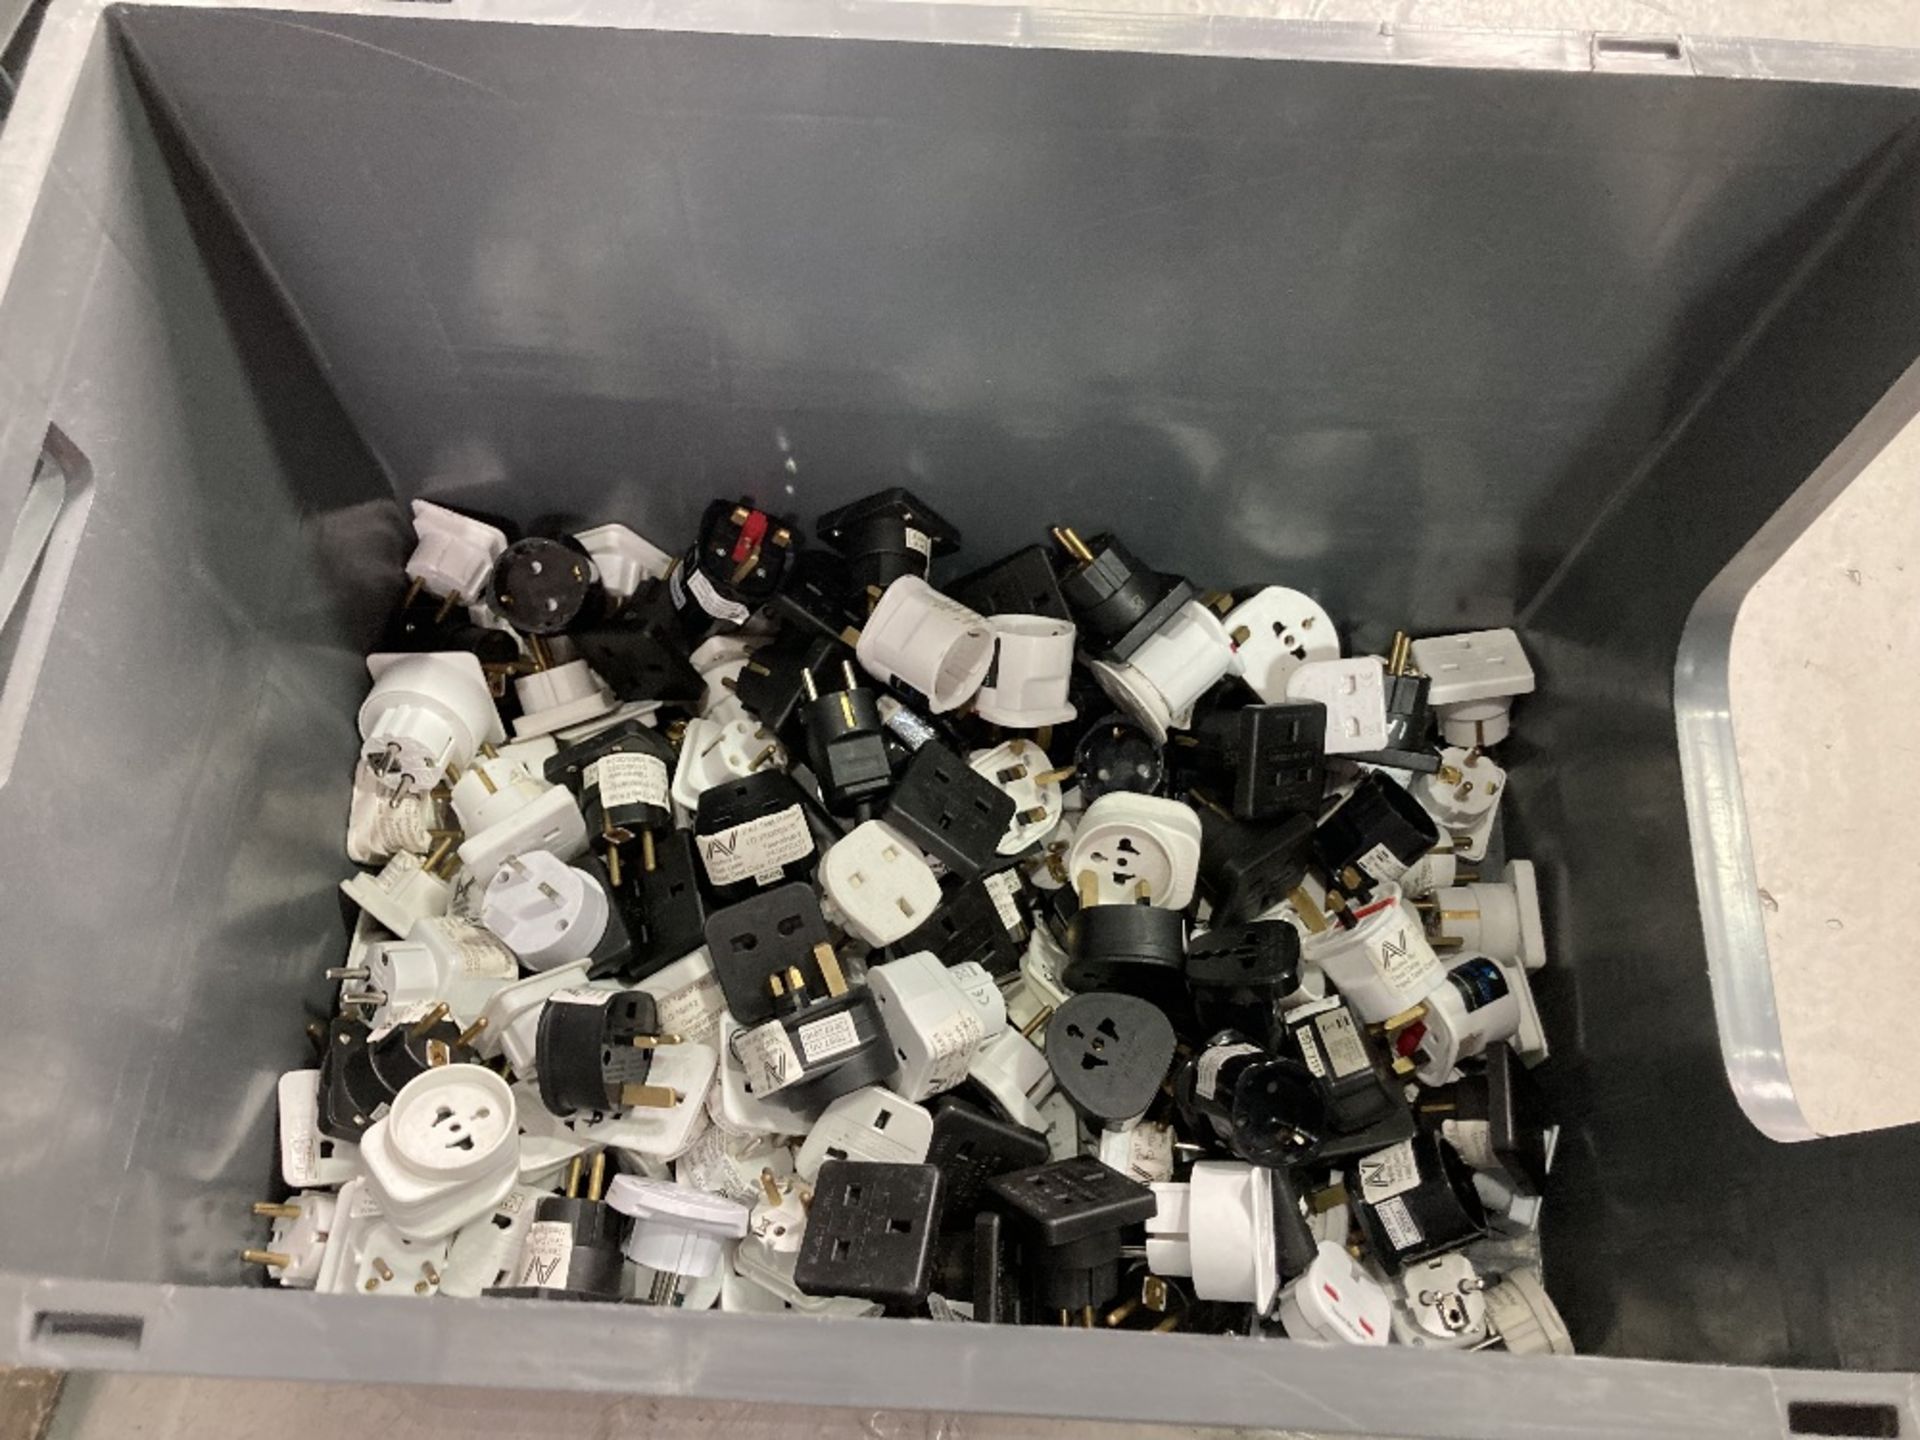 Quantity of 3-Pin Euro Socket Adapters With Plastic Lin Bin - Image 2 of 3